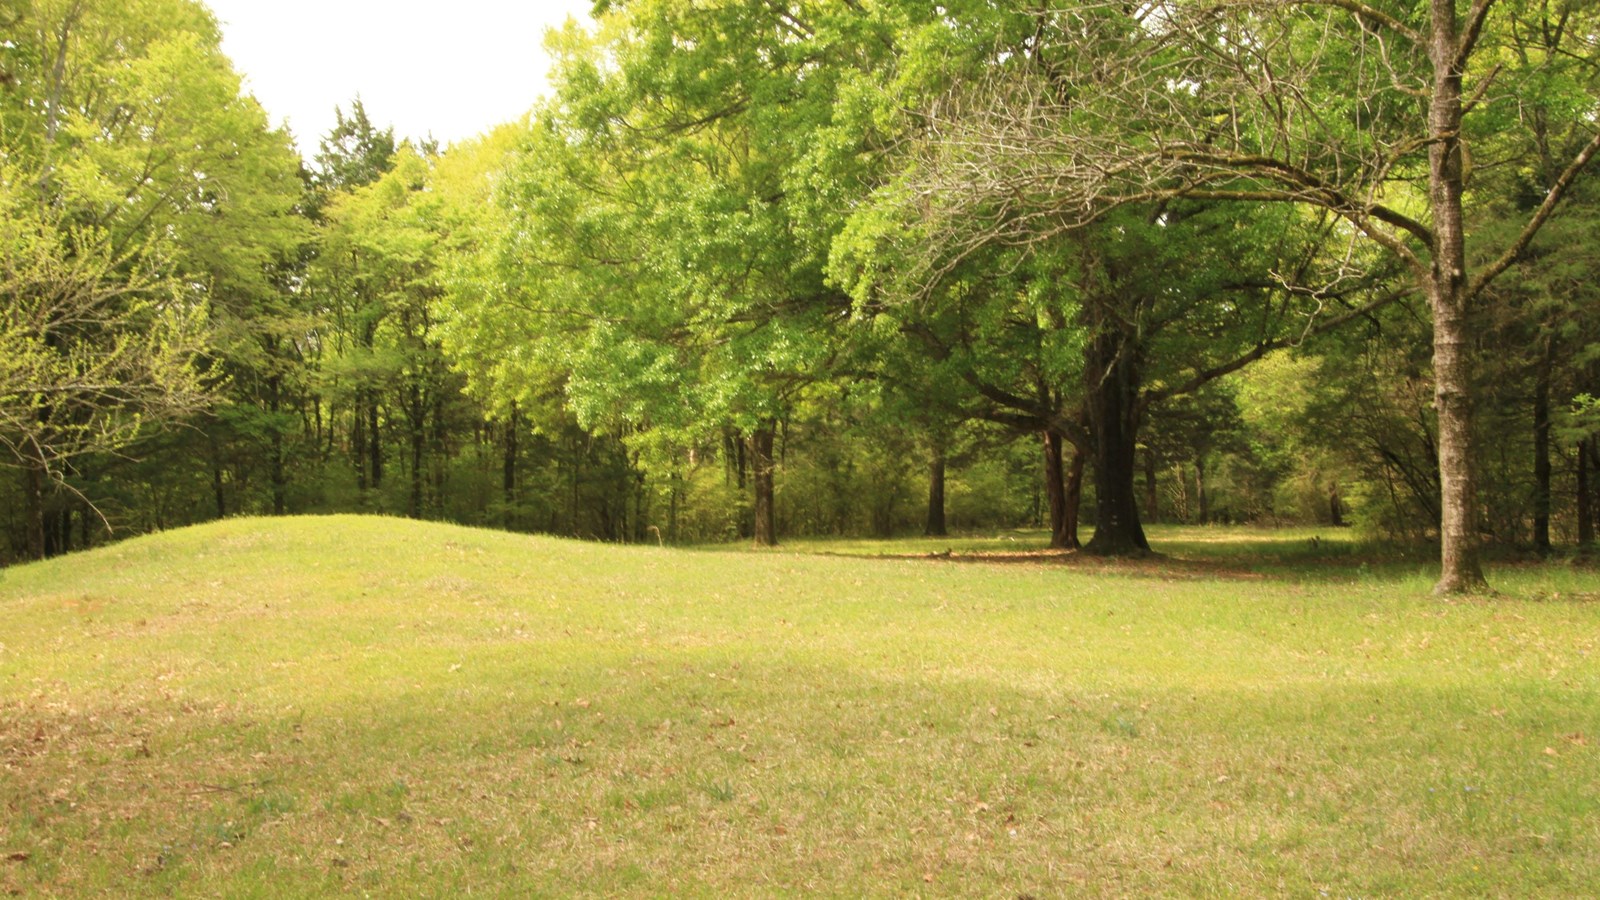 An open grassy area surrounded by trees with a low mound in the center.